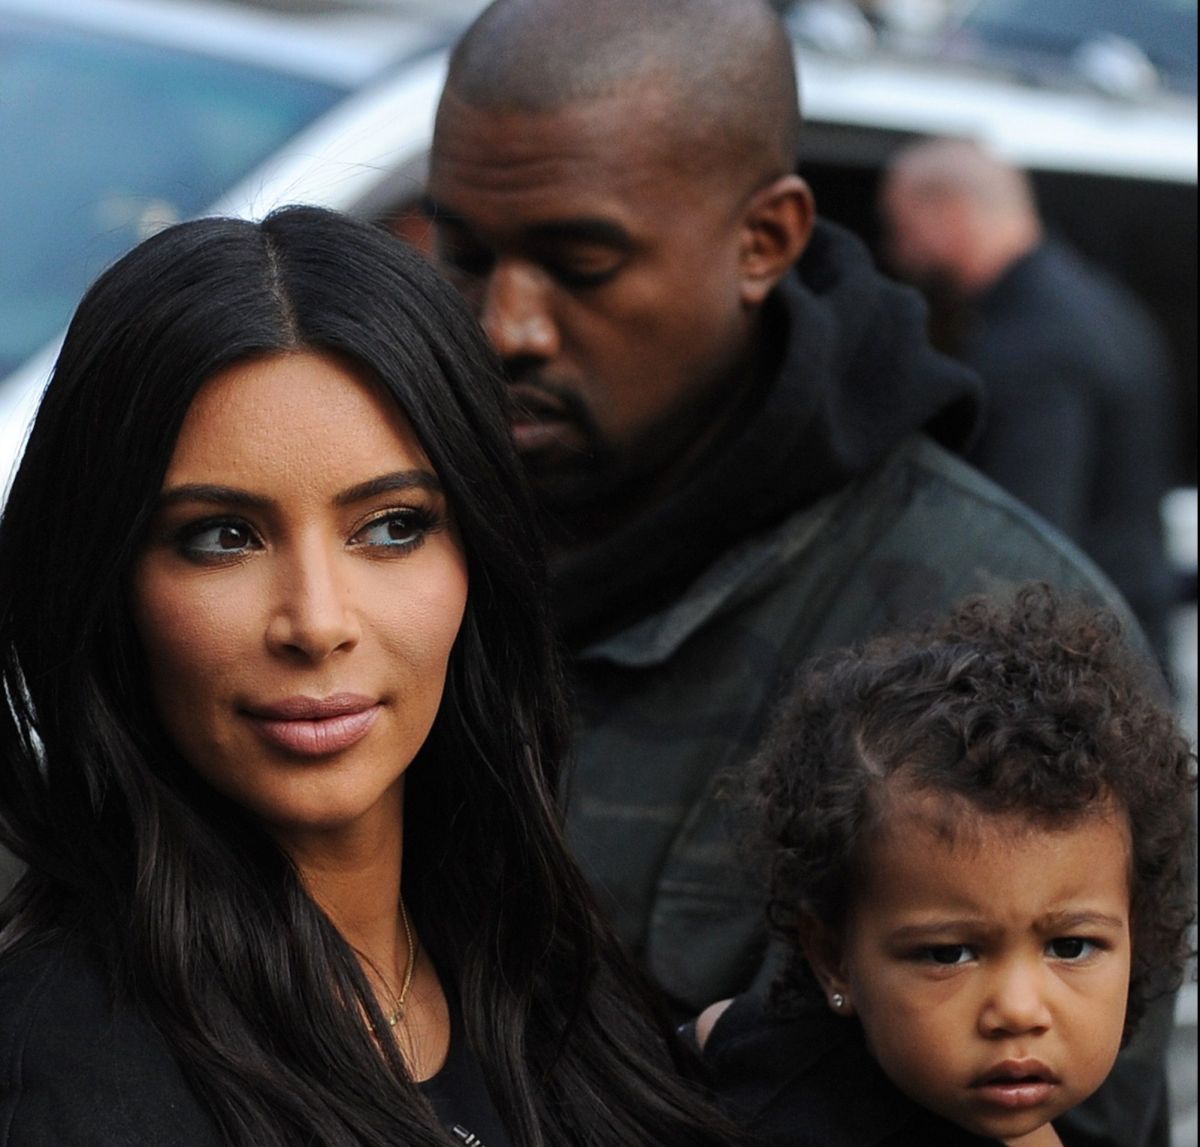 kanye-west-attends-his-daughter-chicago's-birthday-even-though-kim-kardashian-hadn't-invited-him